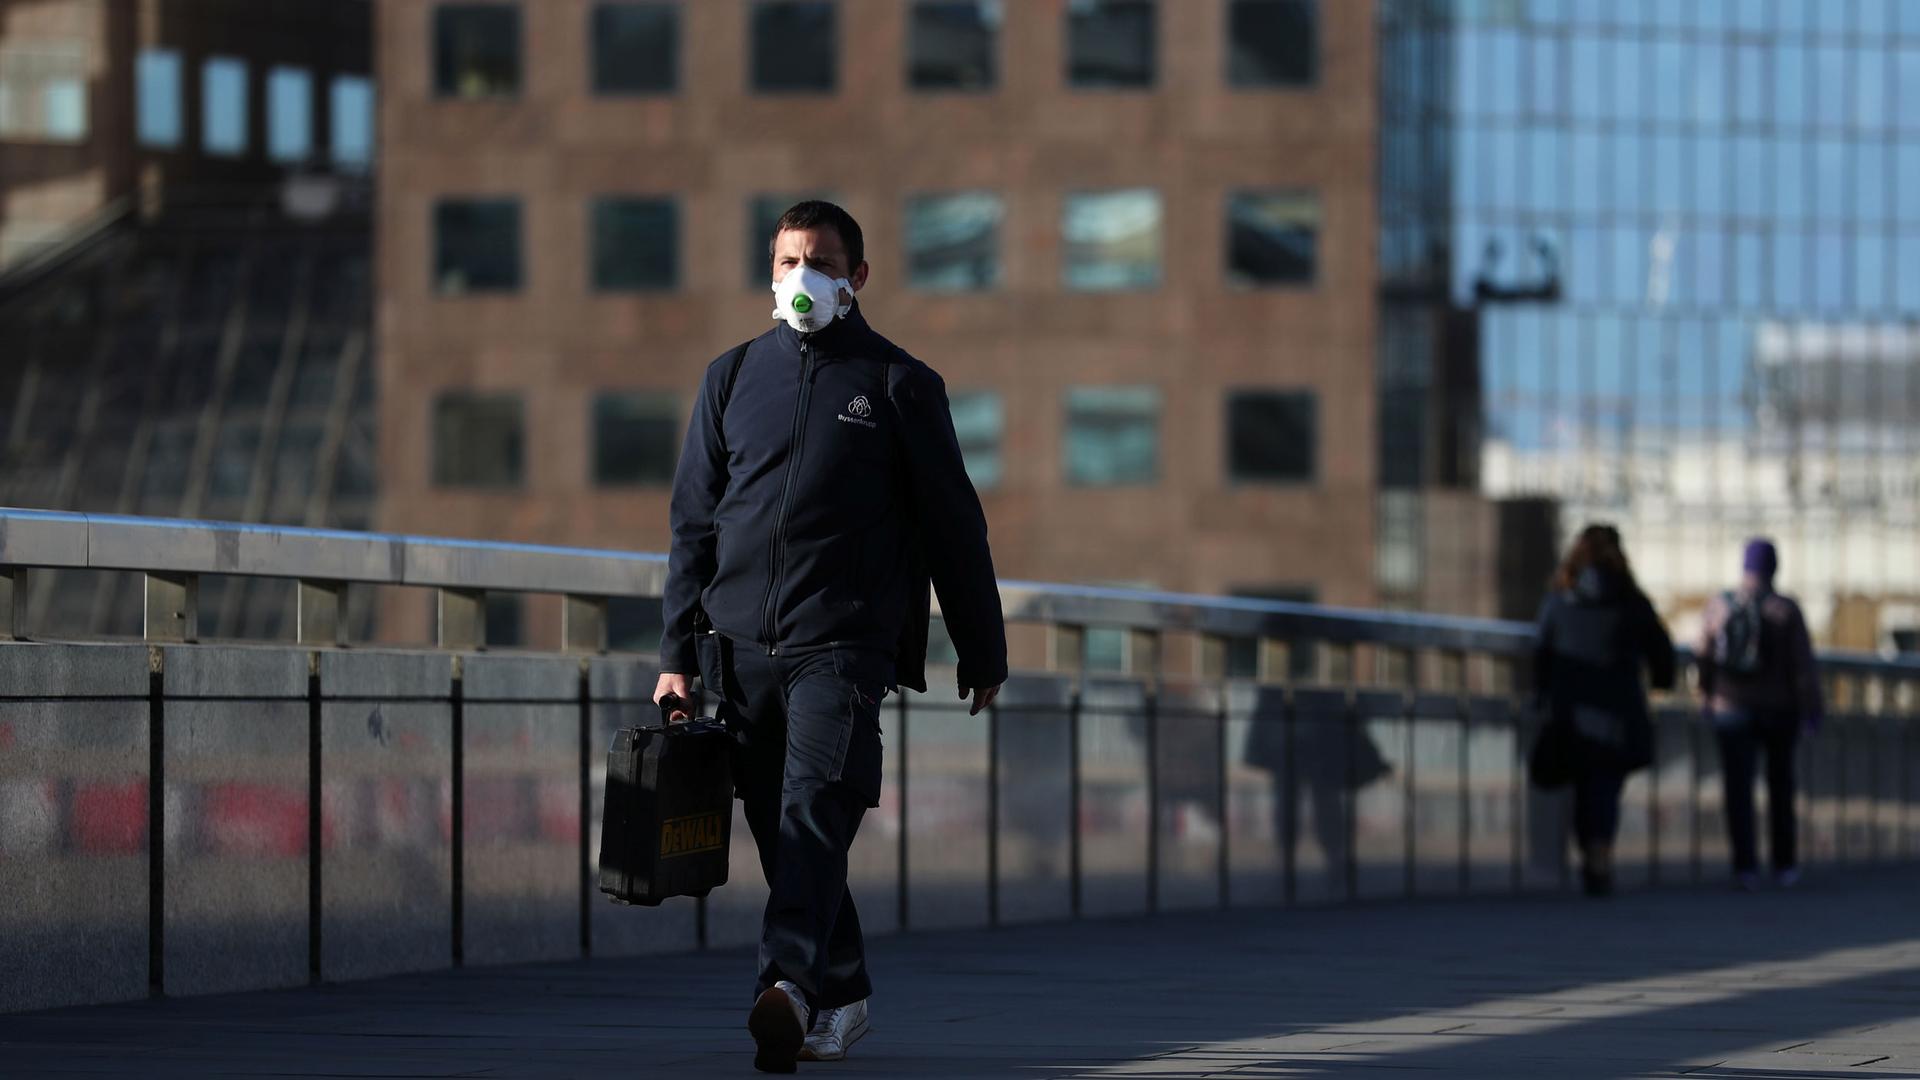 A man is shown wearing a white protective facemask and carrying a briefcase while walking.